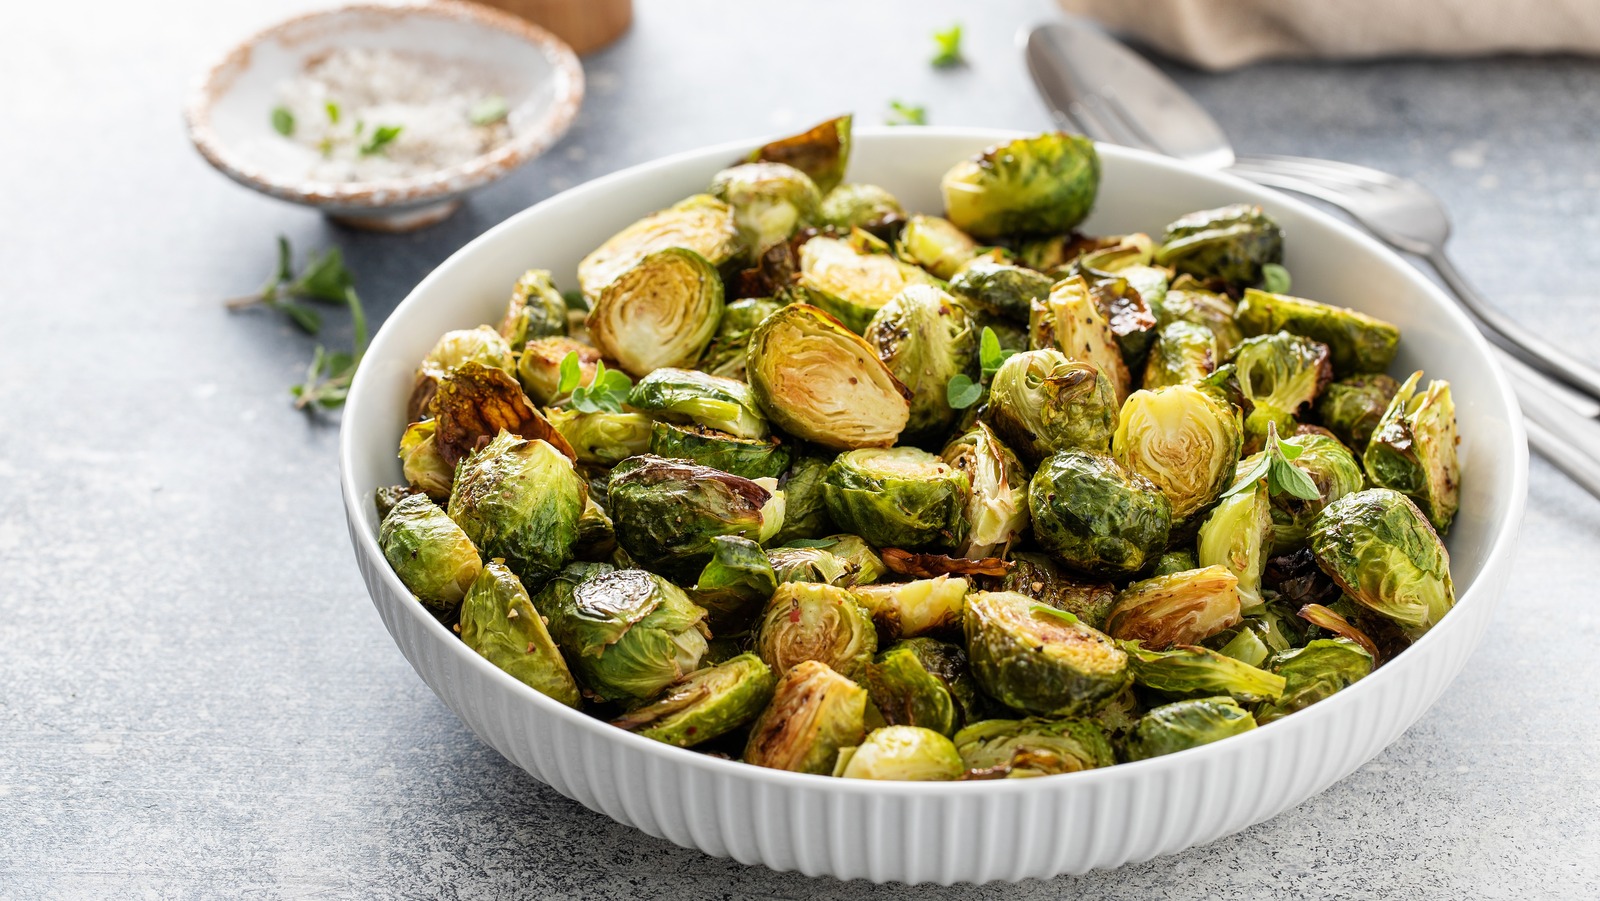 https://www.thedailymeal.com/img/gallery/mistakes-you-are-making-when-cooking-brussels-sprouts/l-intro-1676315476.jpg